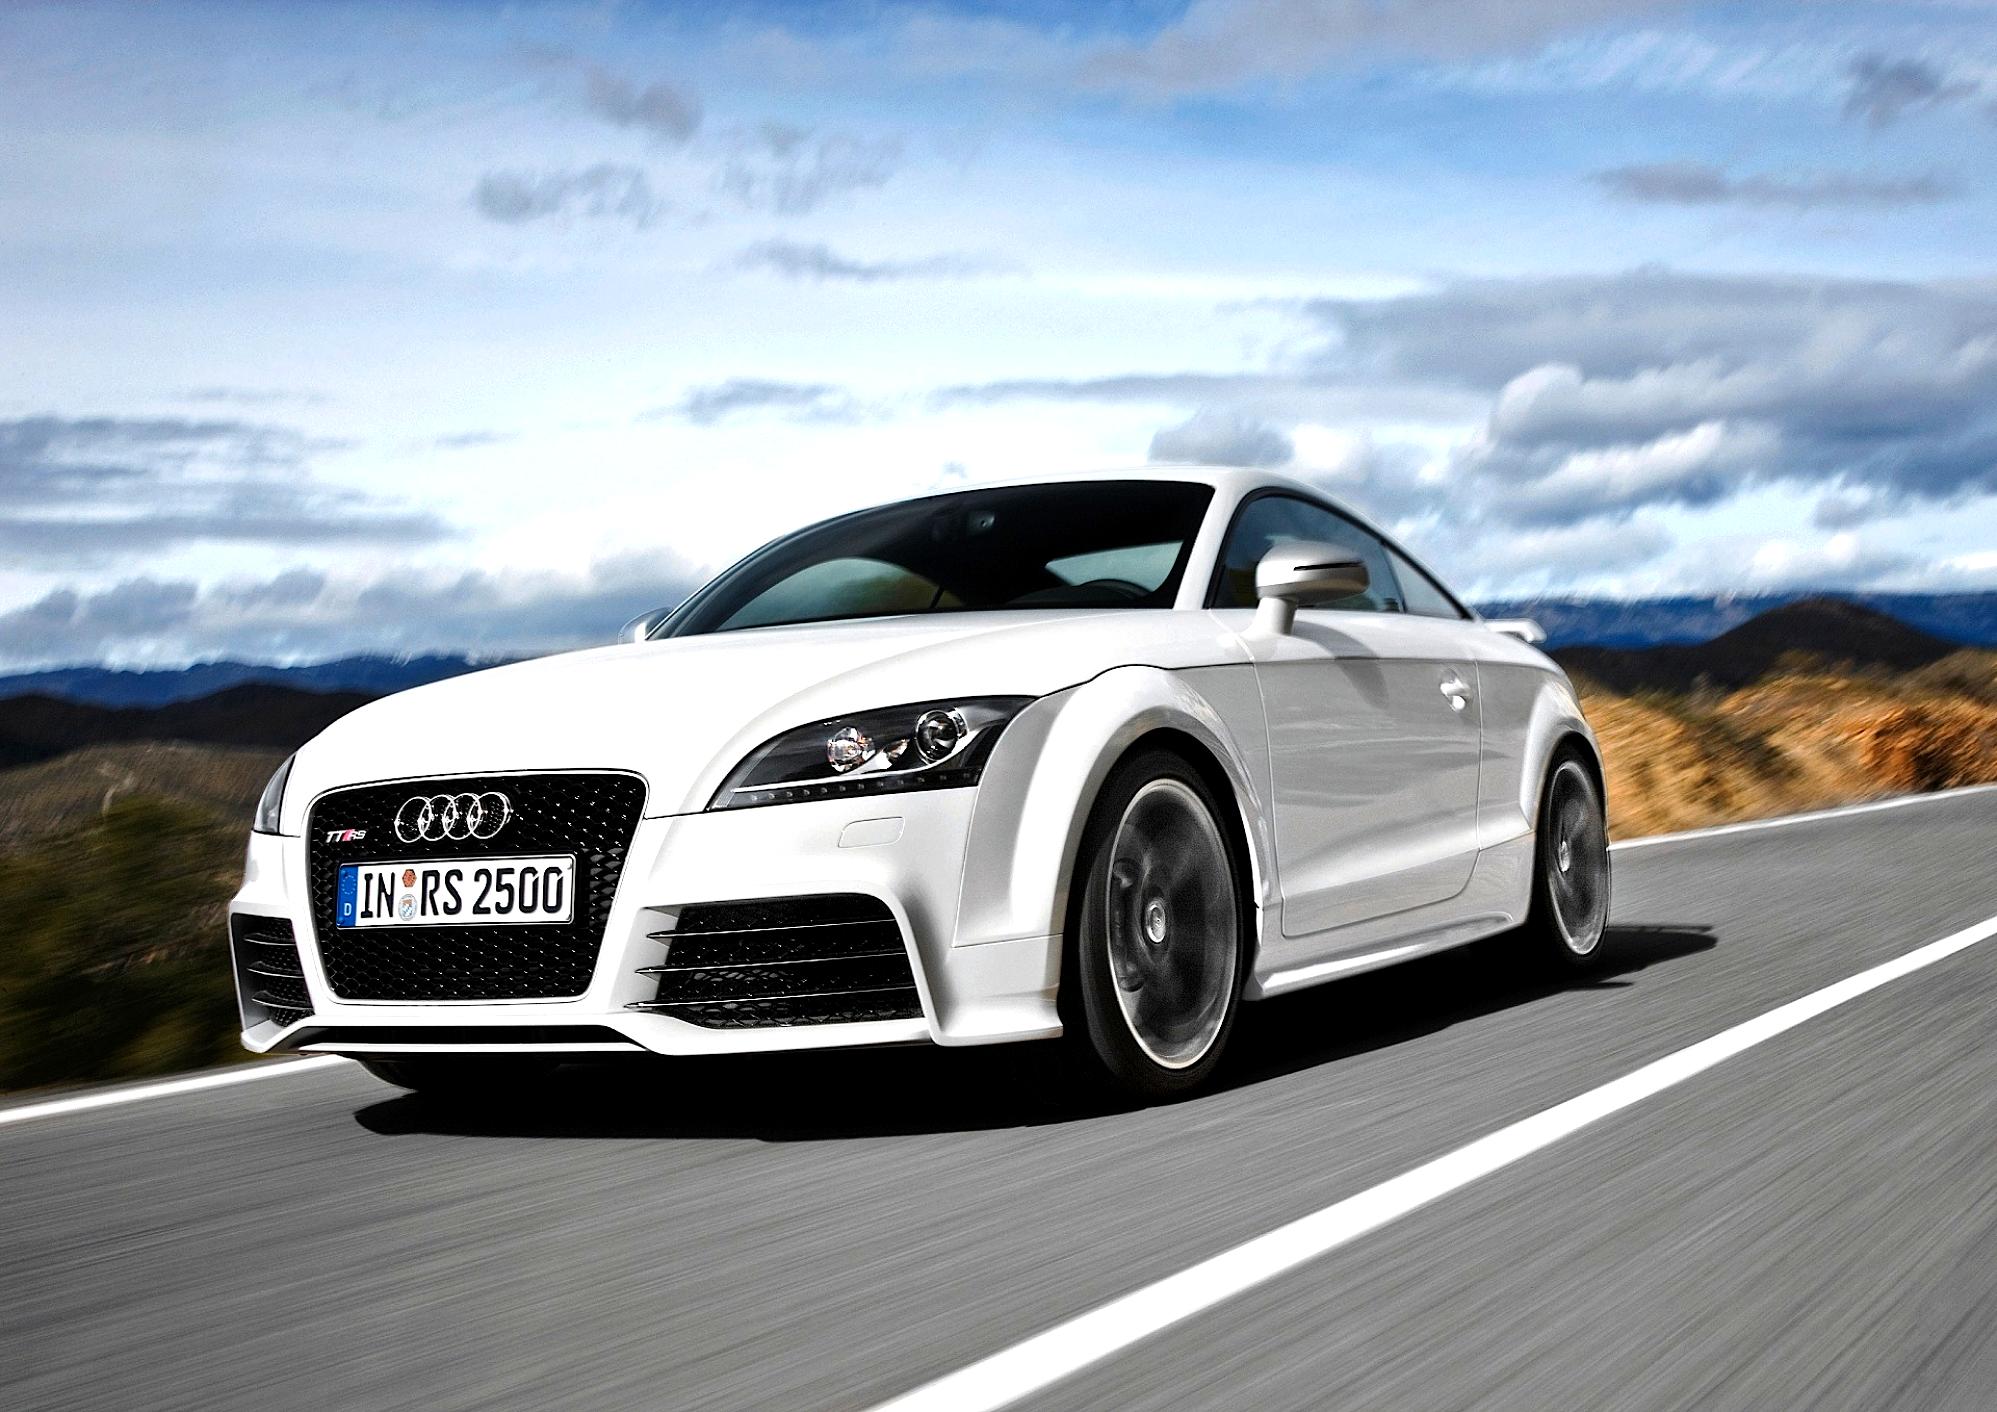 Audi TT RS Coupe 2009 #18